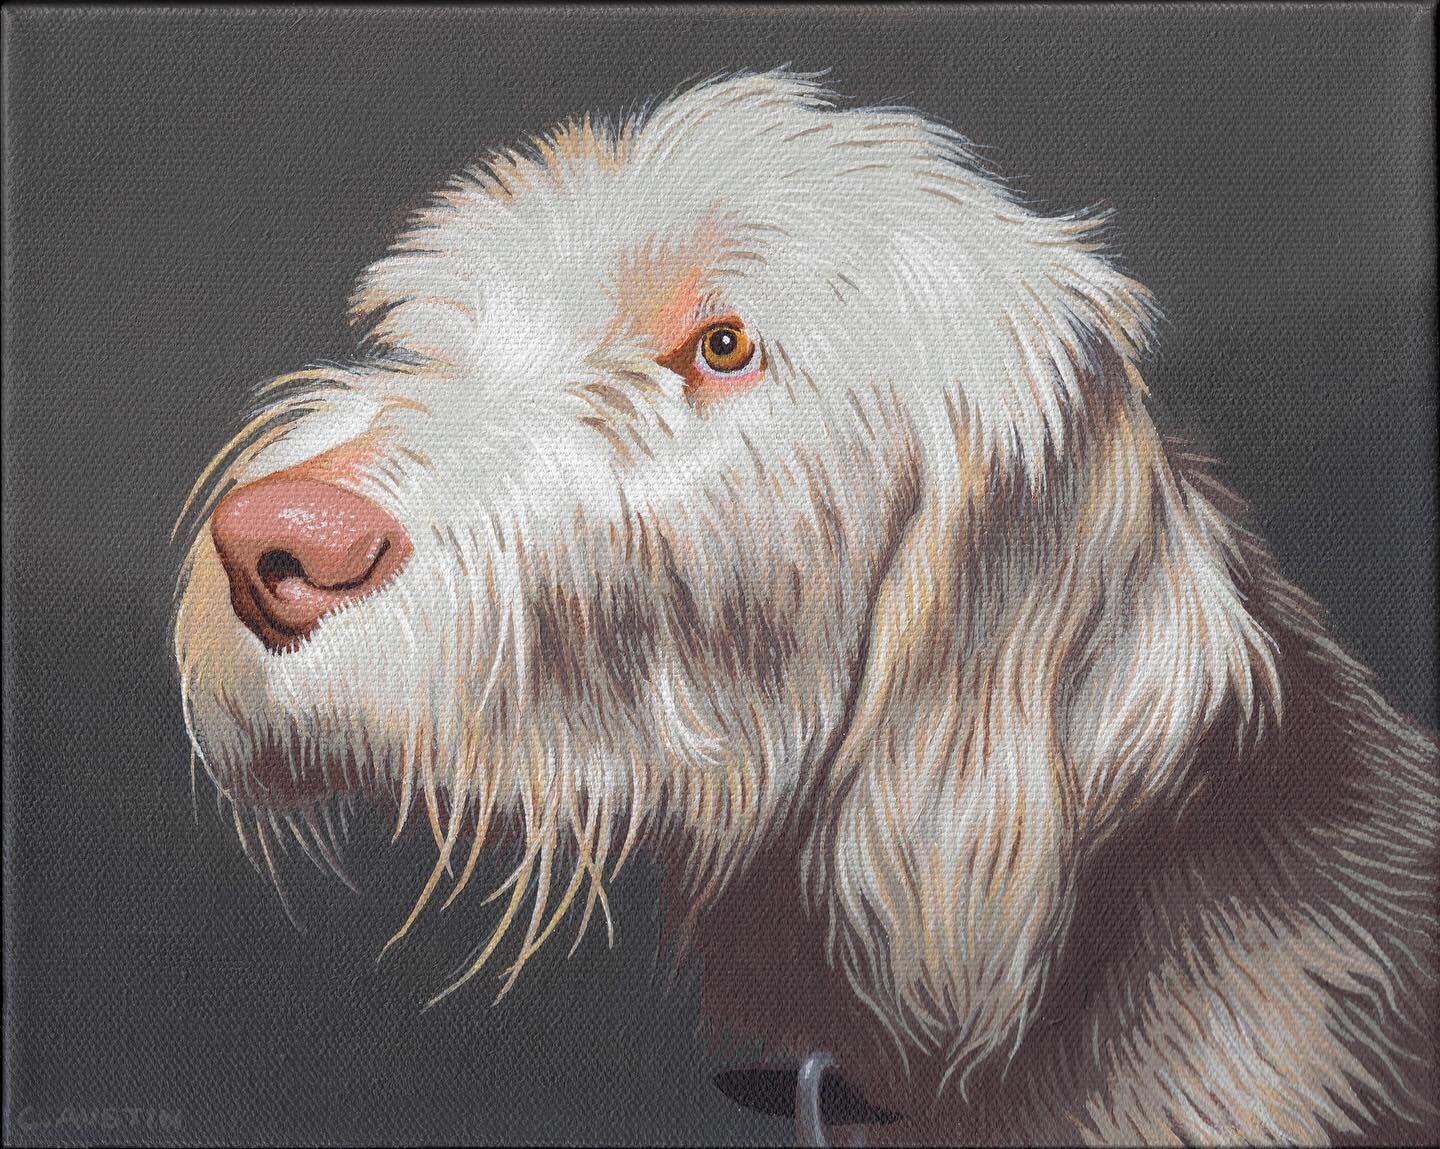 &ldquo;Remy&rdquo; a very handsome Italian Spinone. 8&rdquo;x10&rdquo; acrylic on canvas. I&rsquo;ve been having fun doing these dog portraits, if you are interested in having one done of your dog, DM me, I&rsquo;m open for commissions.